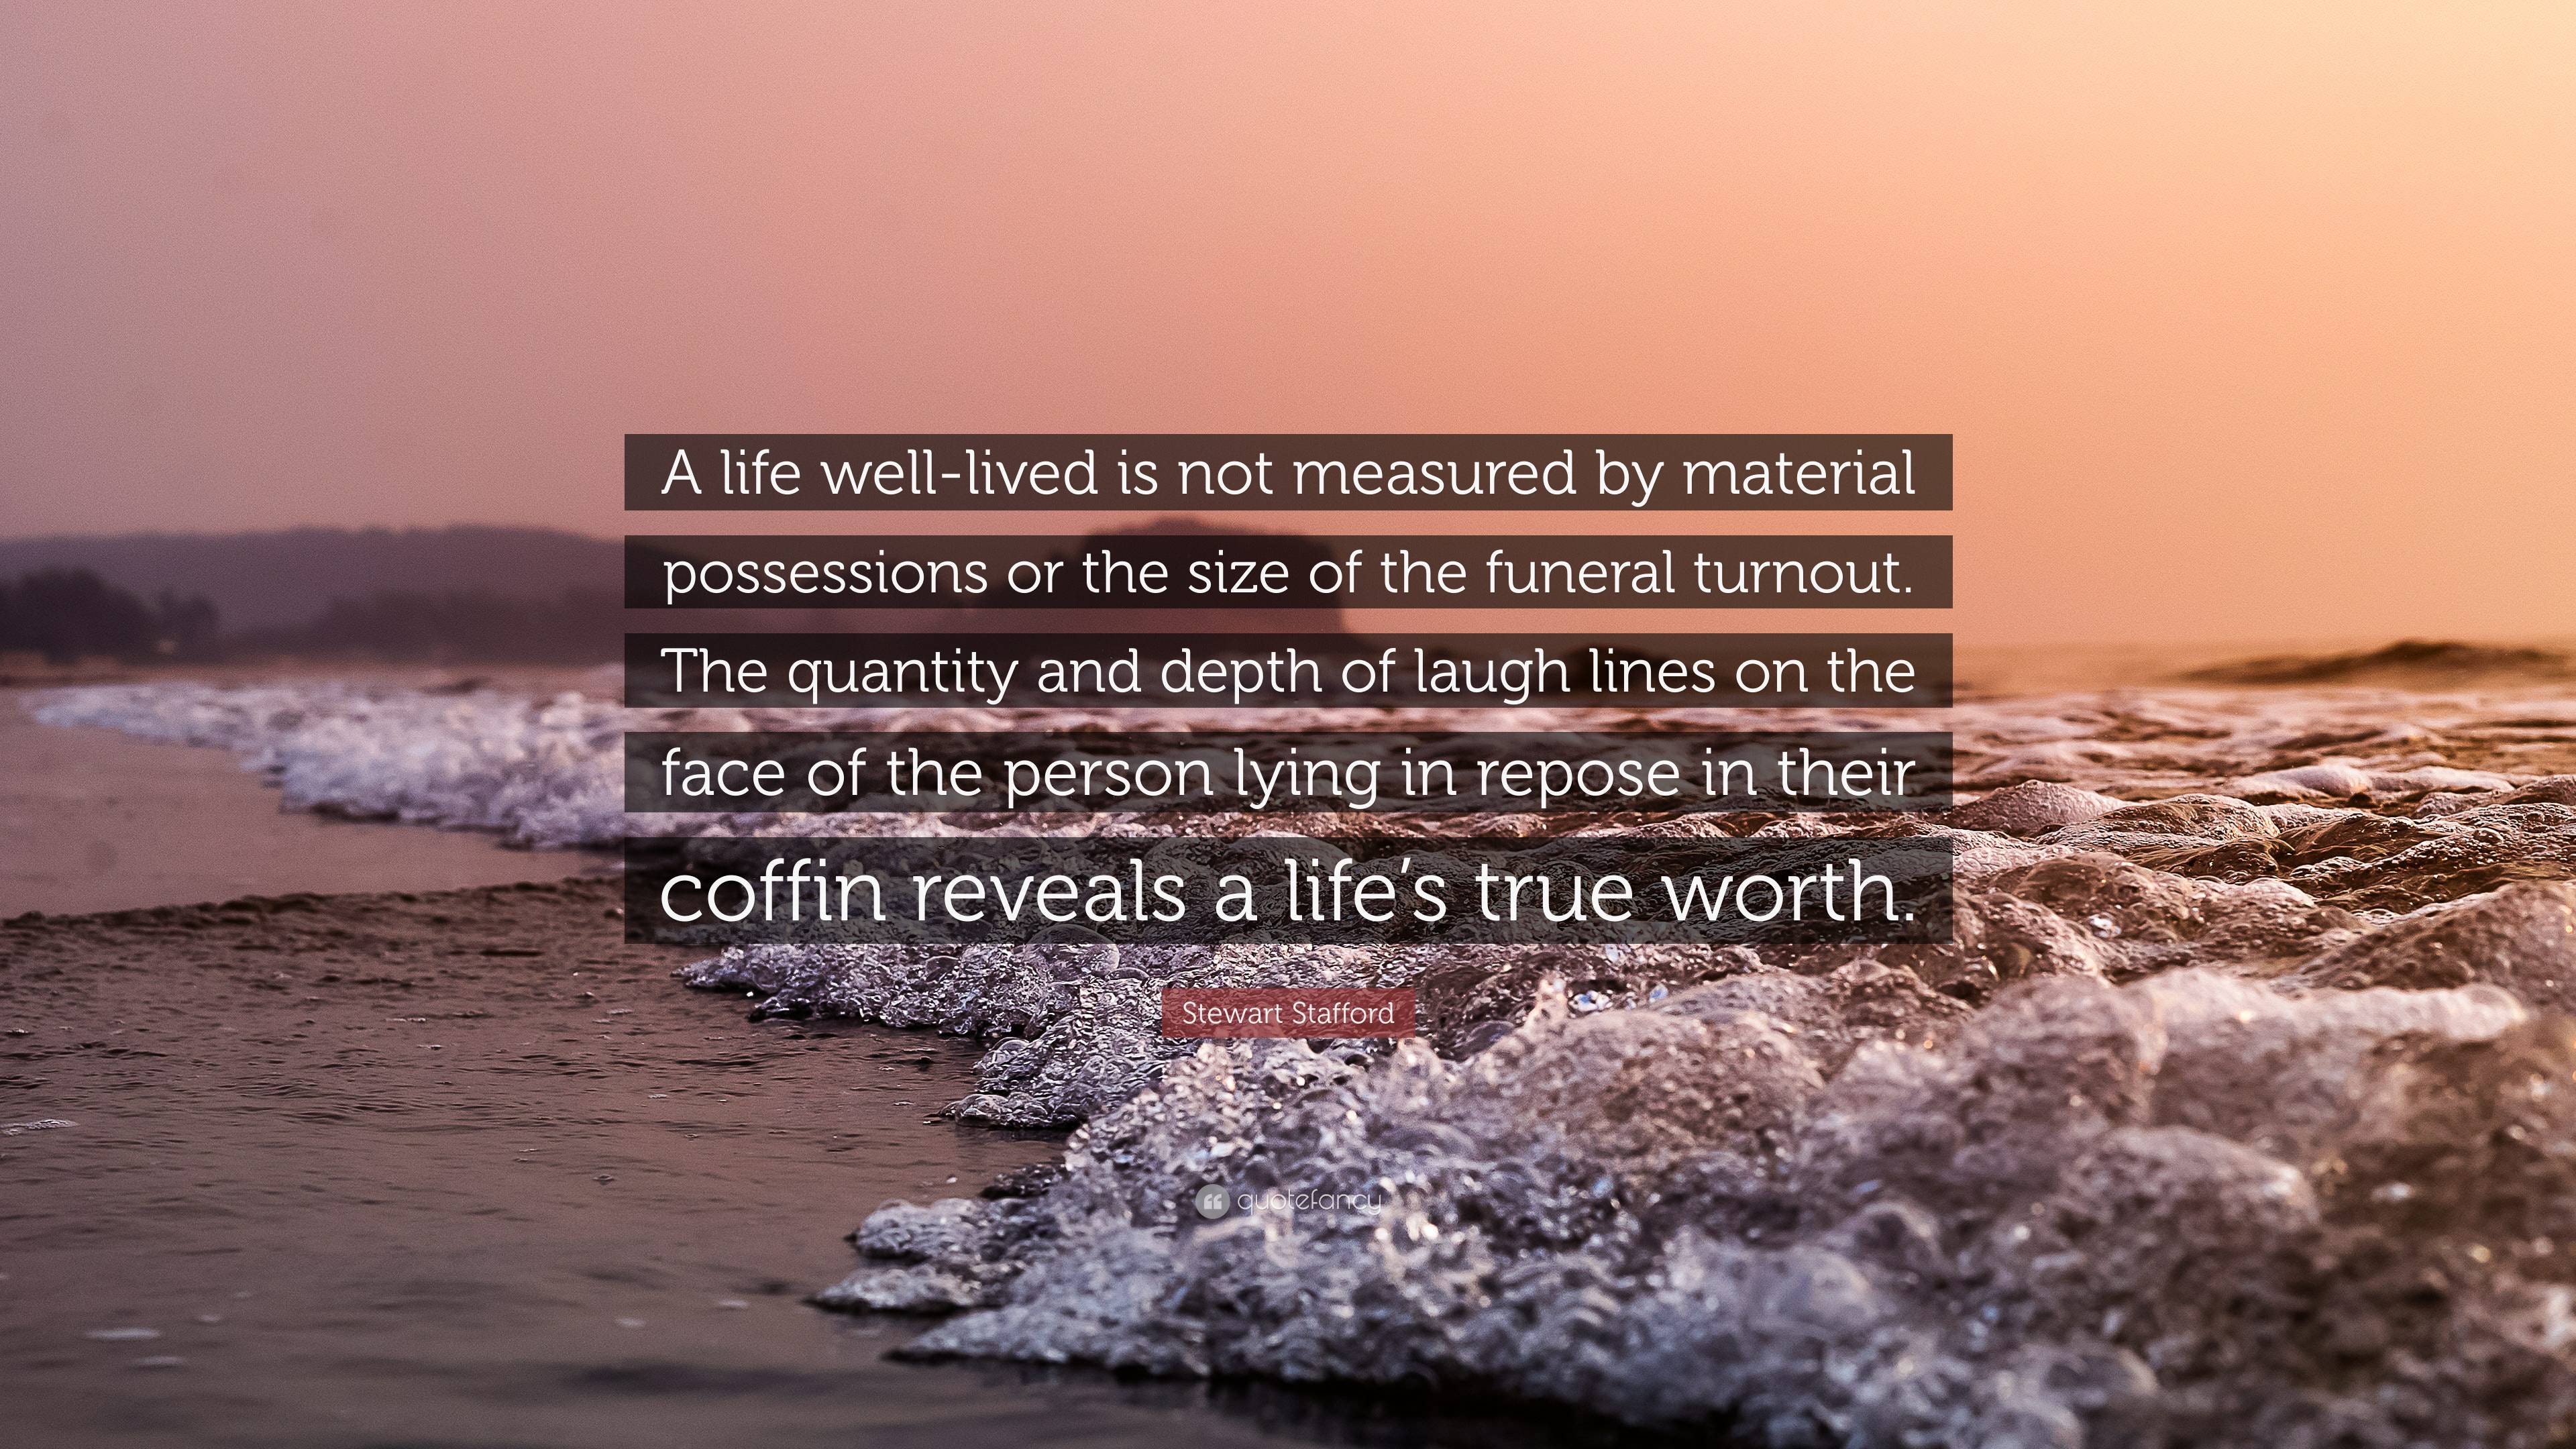 https://quotefancy.com/media/wallpaper/3840x2160/7454260-Stewart-Stafford-Quote-A-life-well-lived-is-not-measured-by.jpg